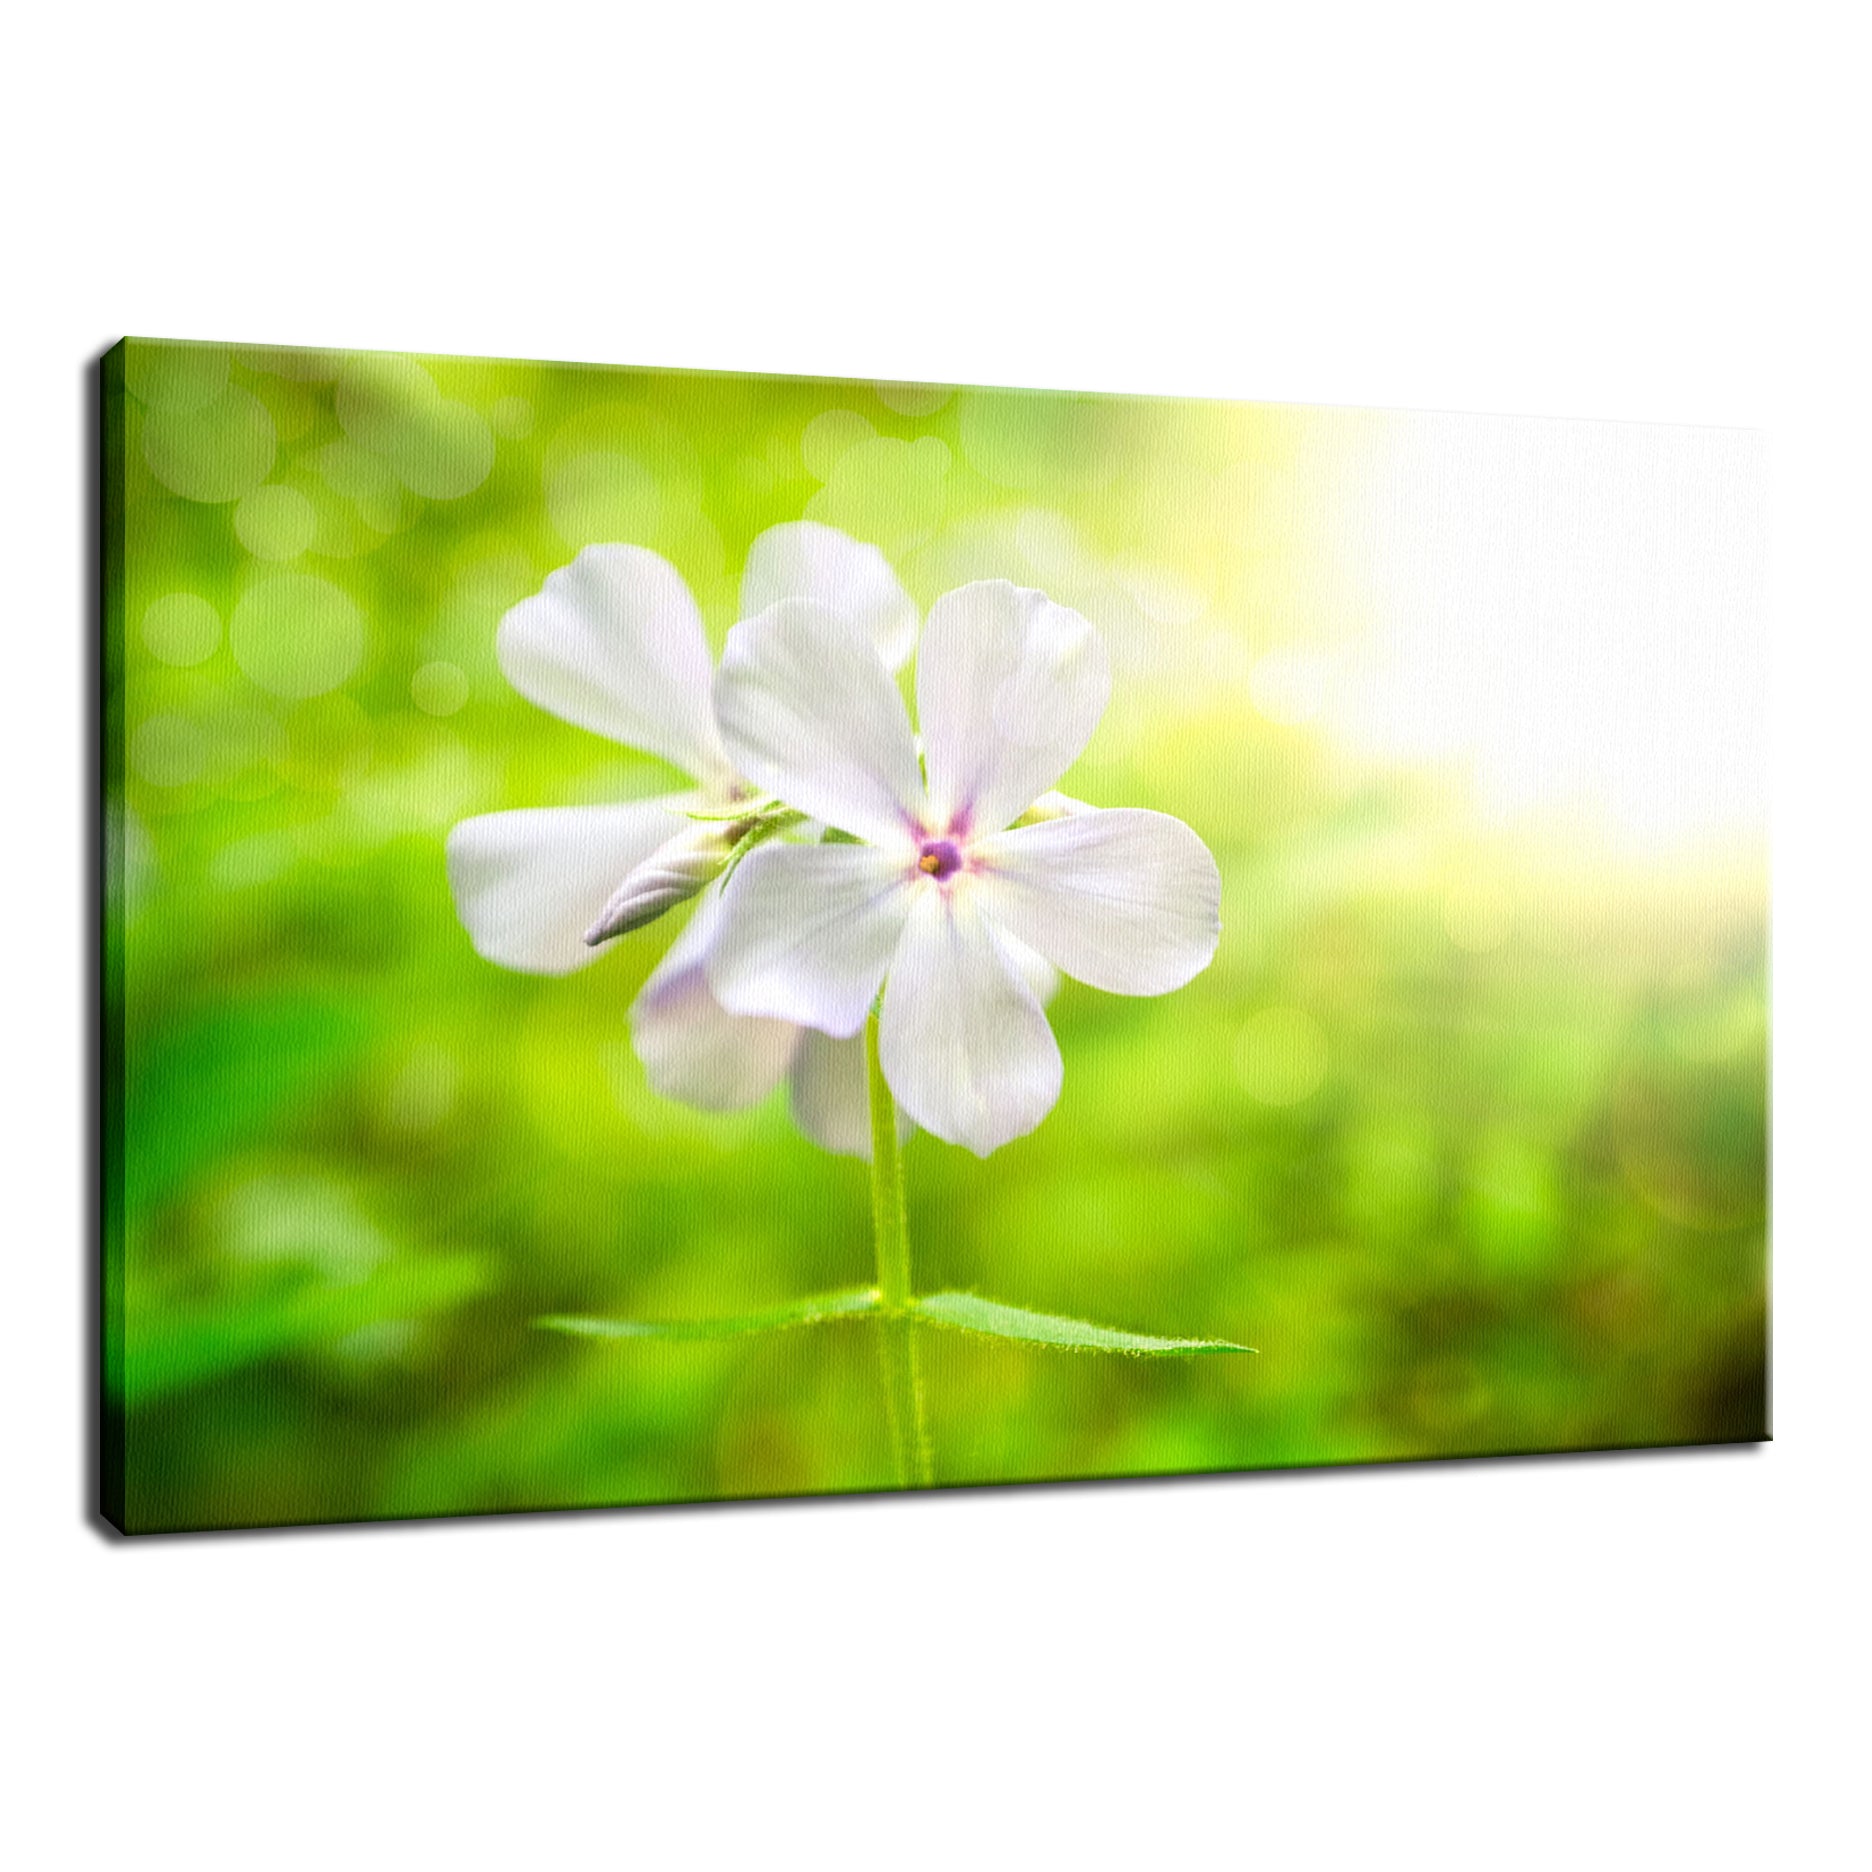 Beauty of the Forest Floor Nature / Floral Photo Fine Art Canvas Wall Art Prints  - PIPAFINEART